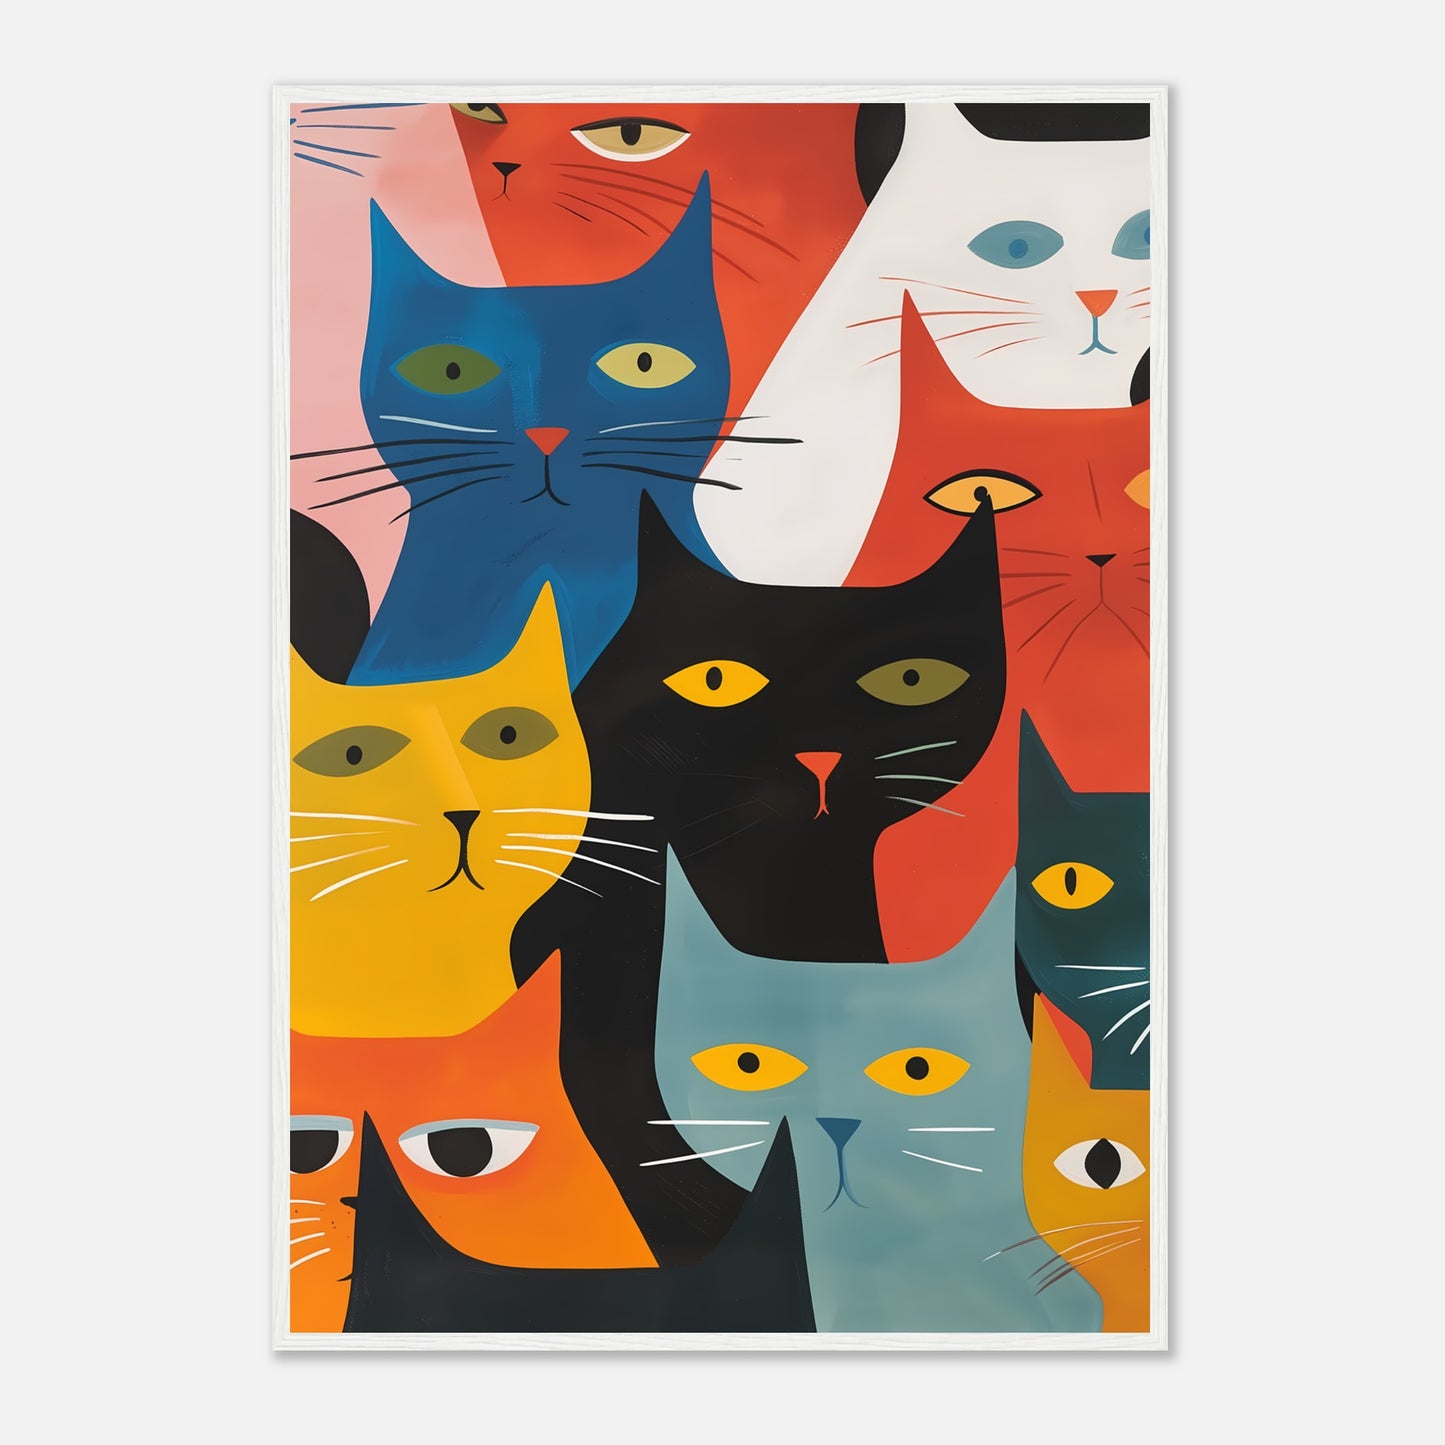 Colorful artistic illustration of various stylized cats on a canvas.